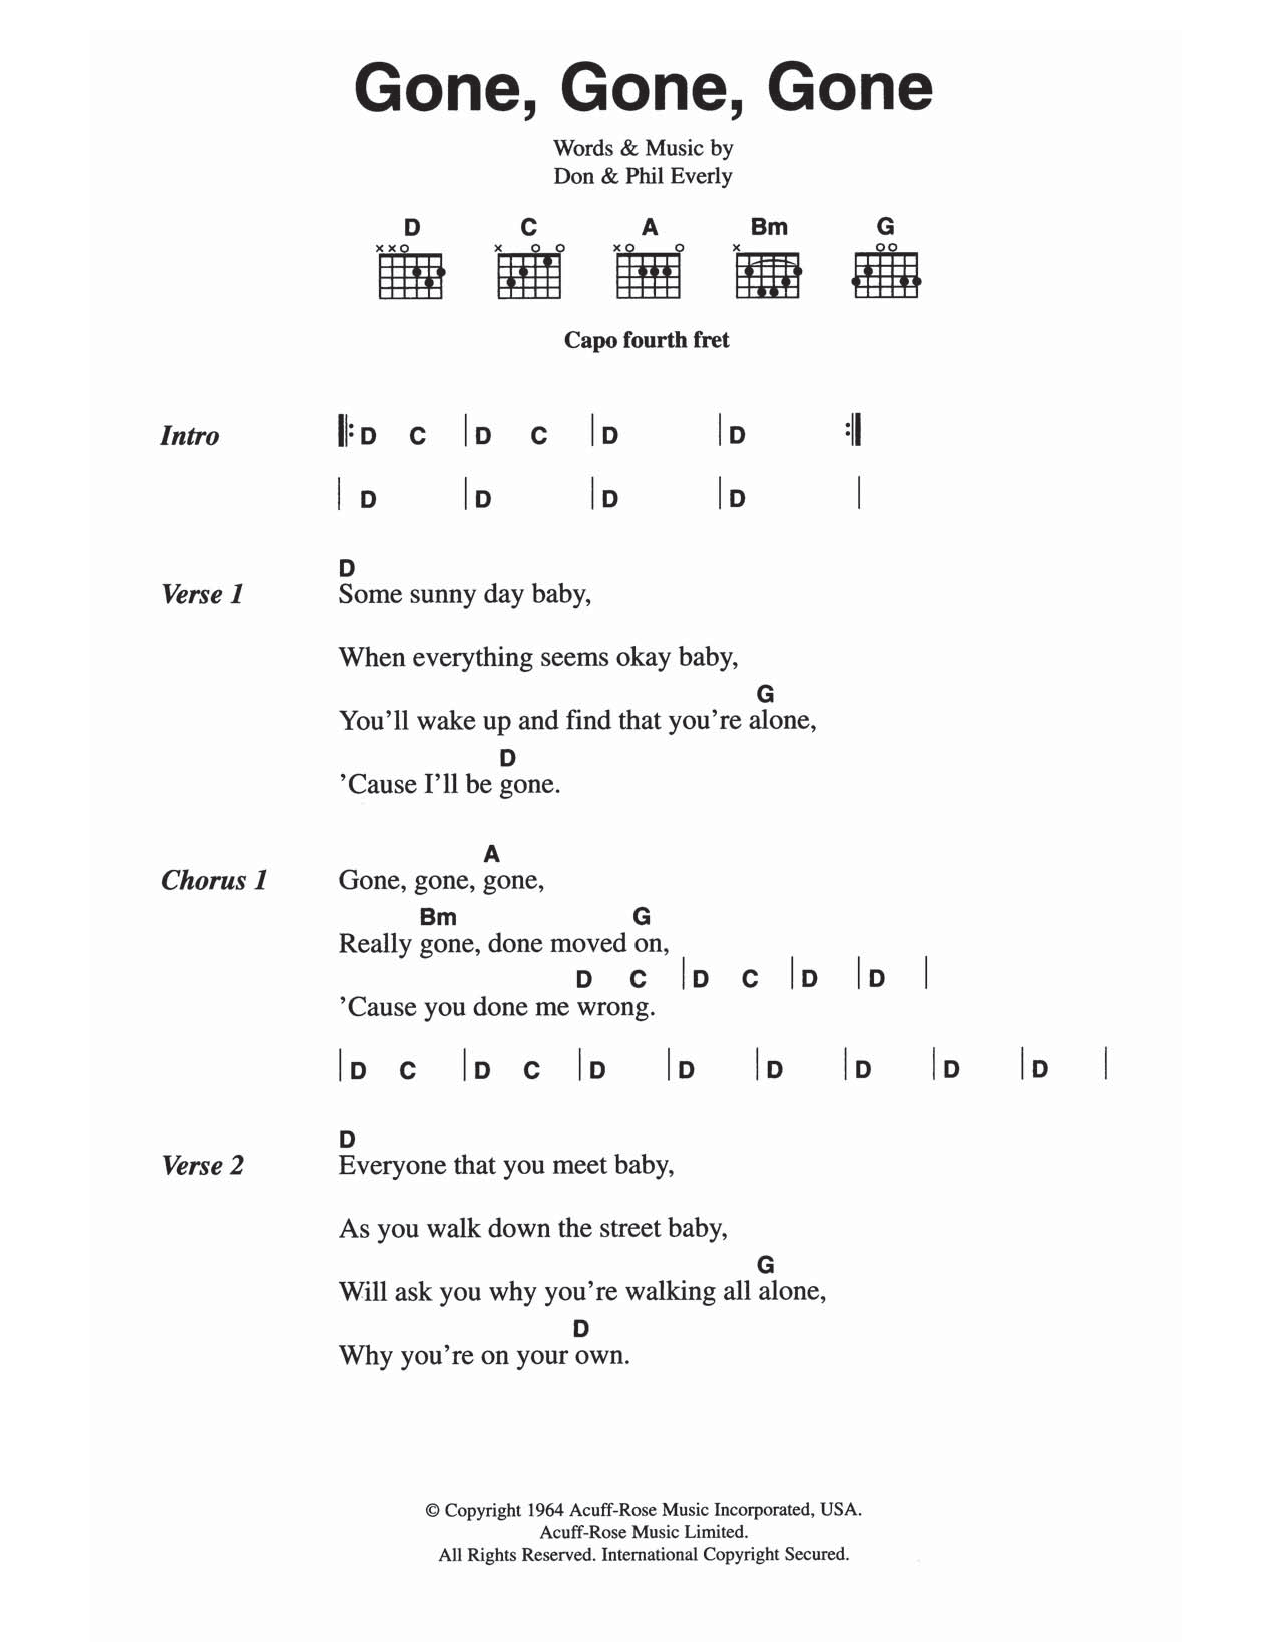 Download The Everly Brothers Gone, Gone, Gone (Done Moved On) Sheet Music